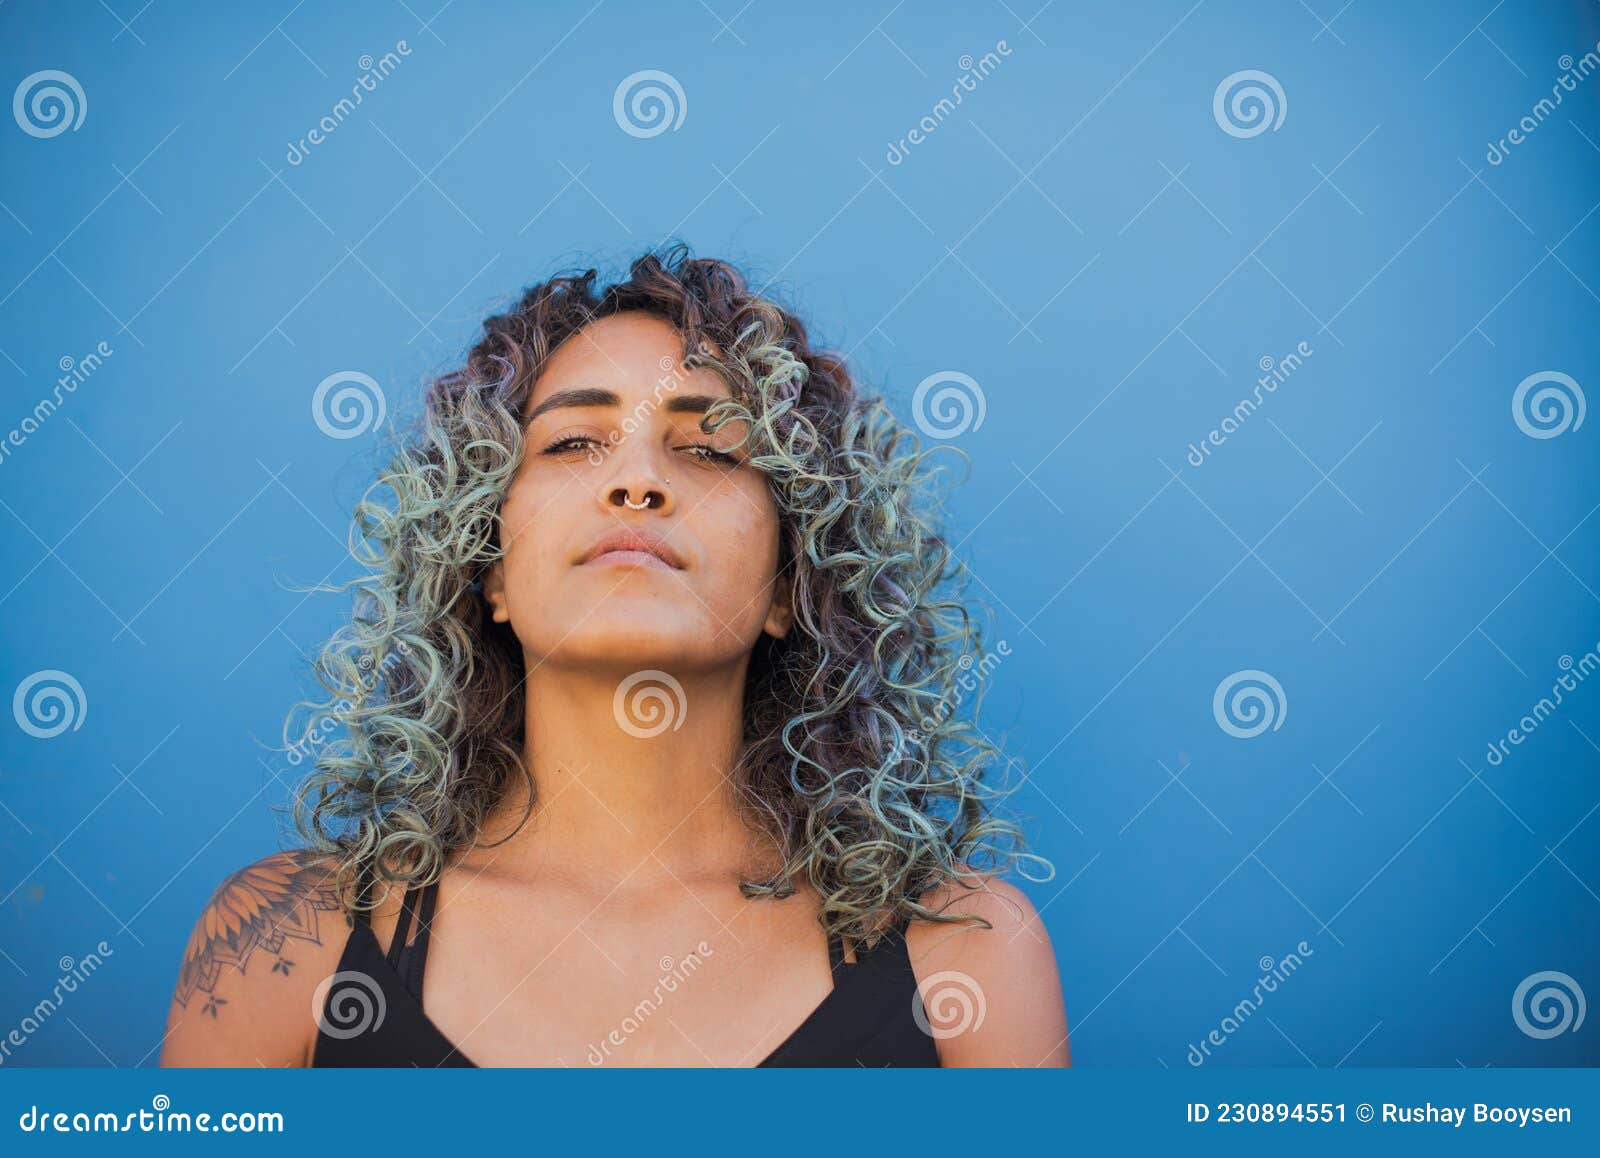 Portrait Of Woman With Curly Hair Shot Up Close Stock Image Image Of Horizontal Look 230894551 